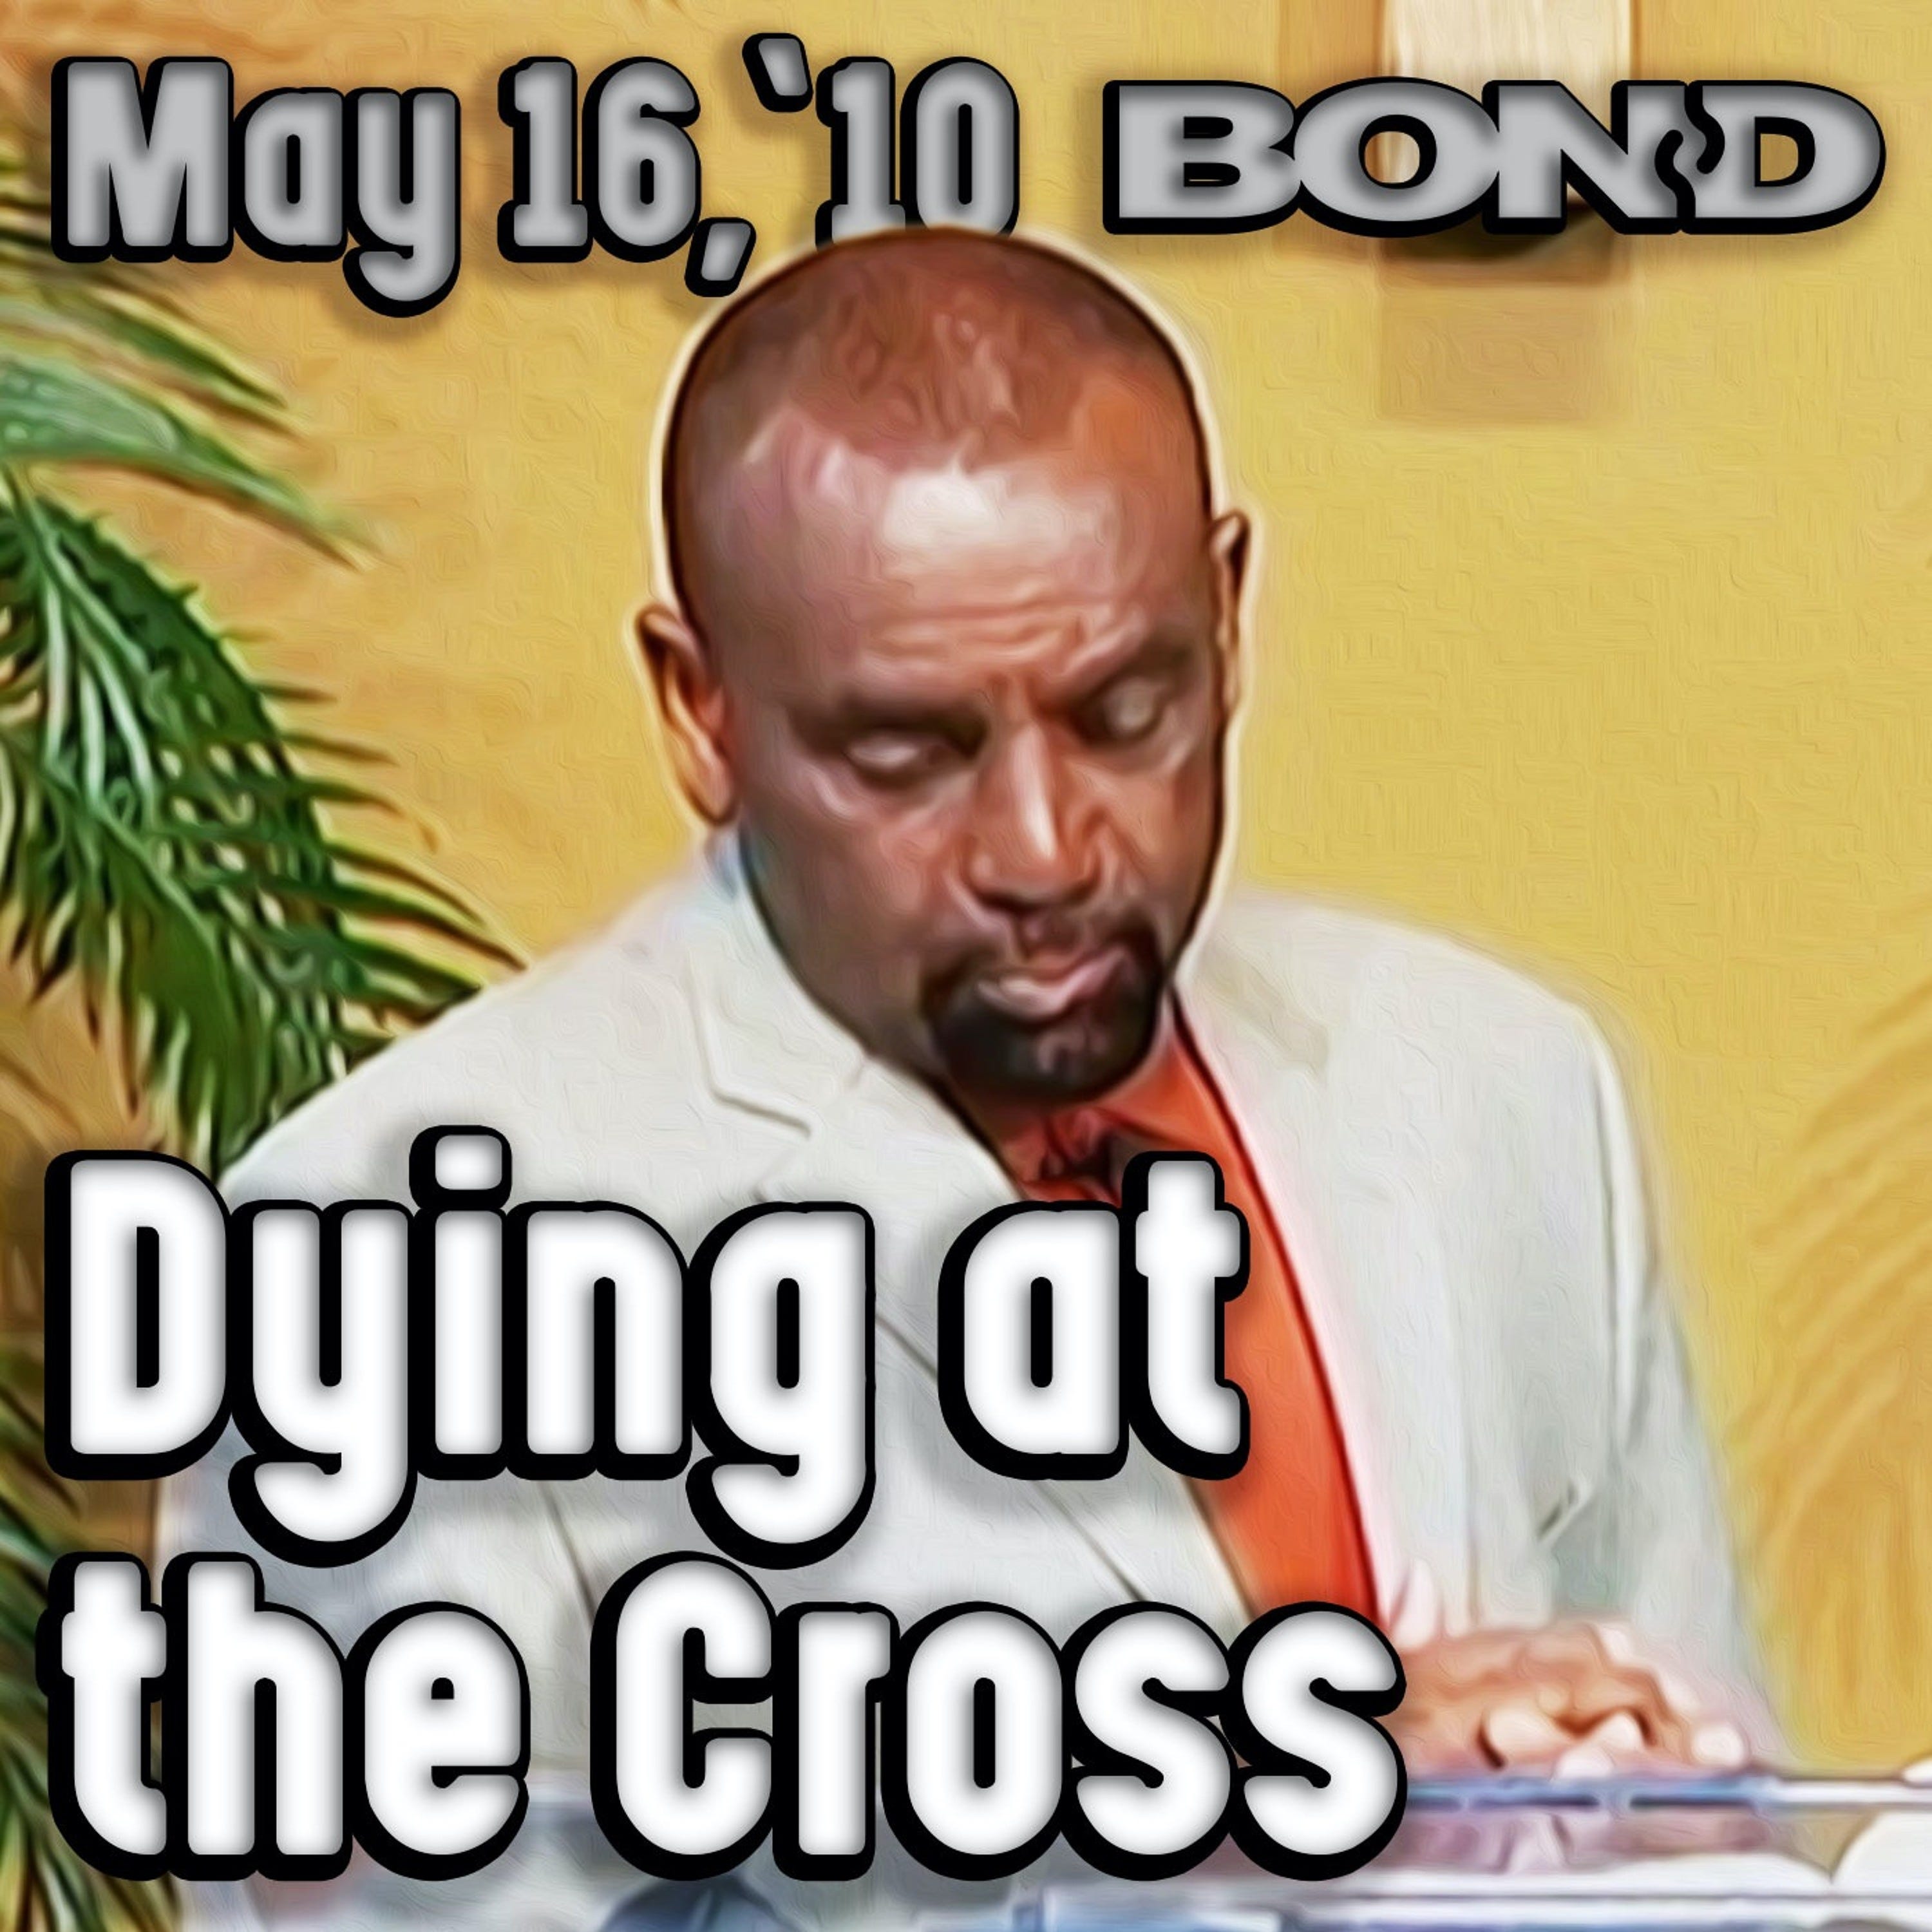 05/16/10 Dying at the Cross, Part 2 (Sunday Service Archive)